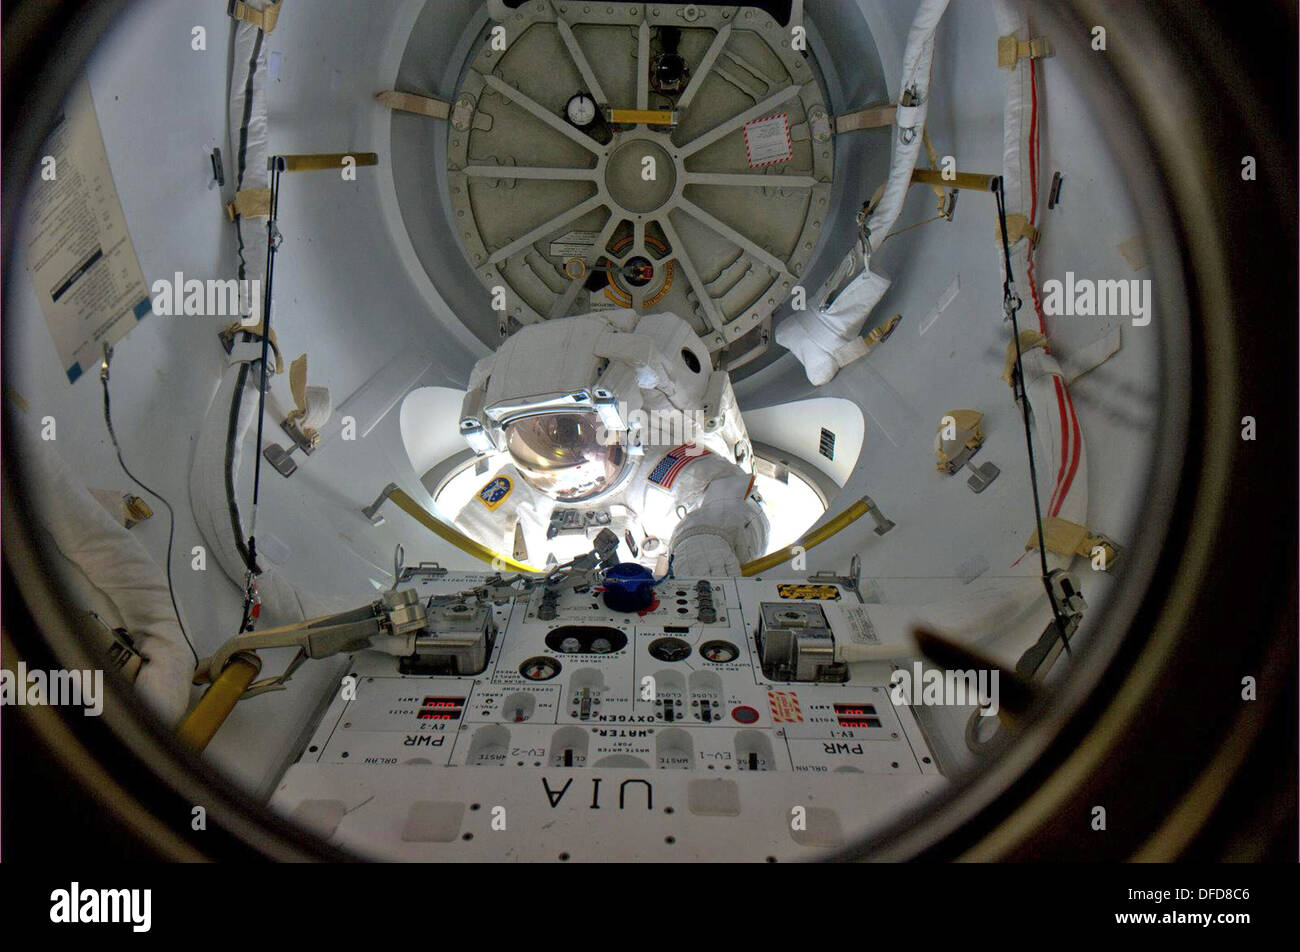 Emerging from the Quest airlock on the International Space Station, astronaut Alvin Drew began his shared spacewalking duties Stock Photo